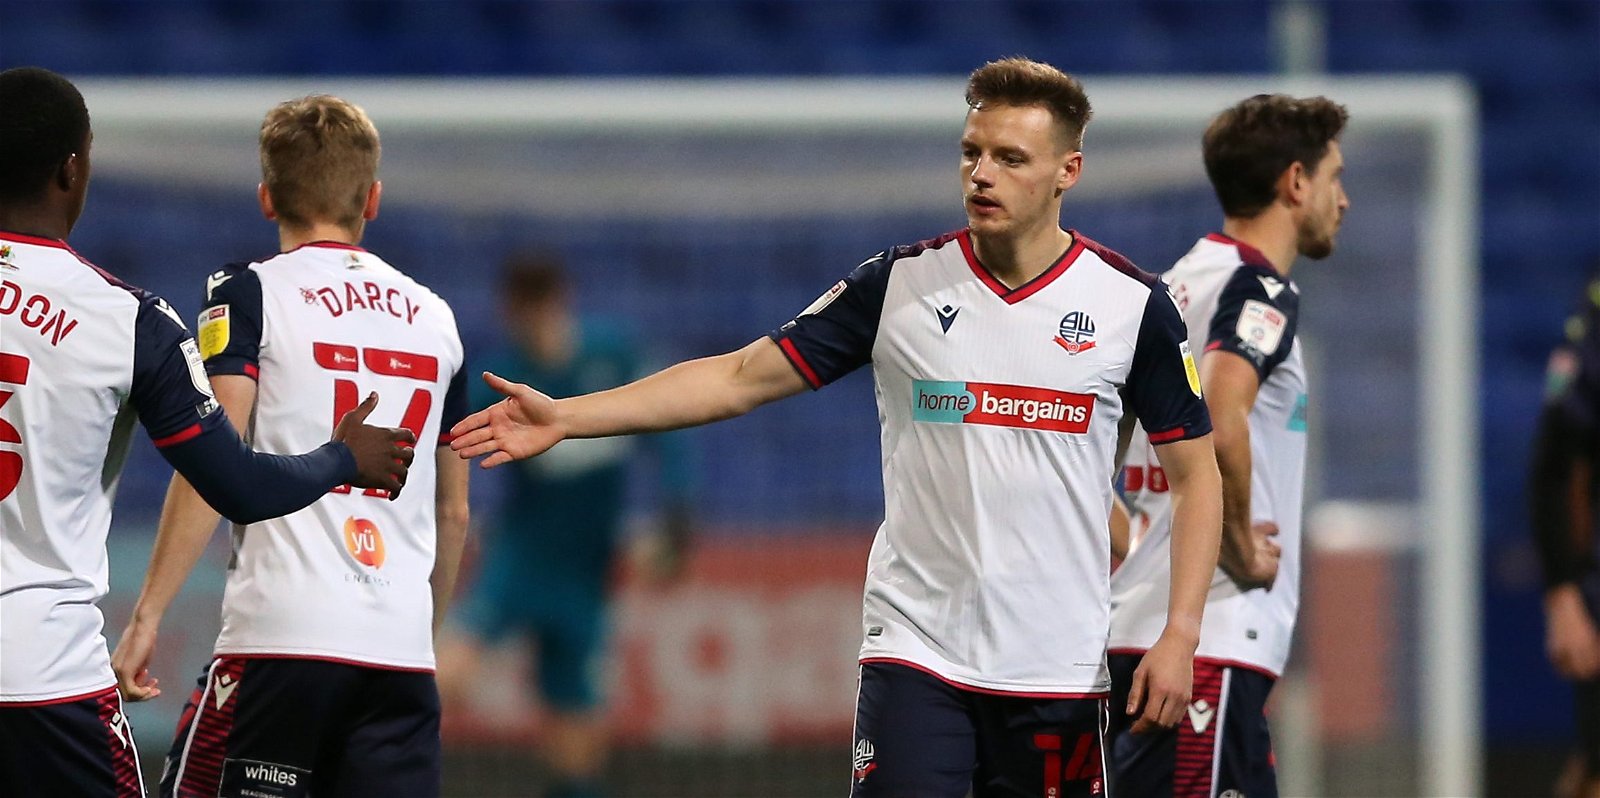 Bolton Wanderers Blackburn Rovers, Blackburn Rovers &#8216;expected&#8217; to release 23-y/o midfielder